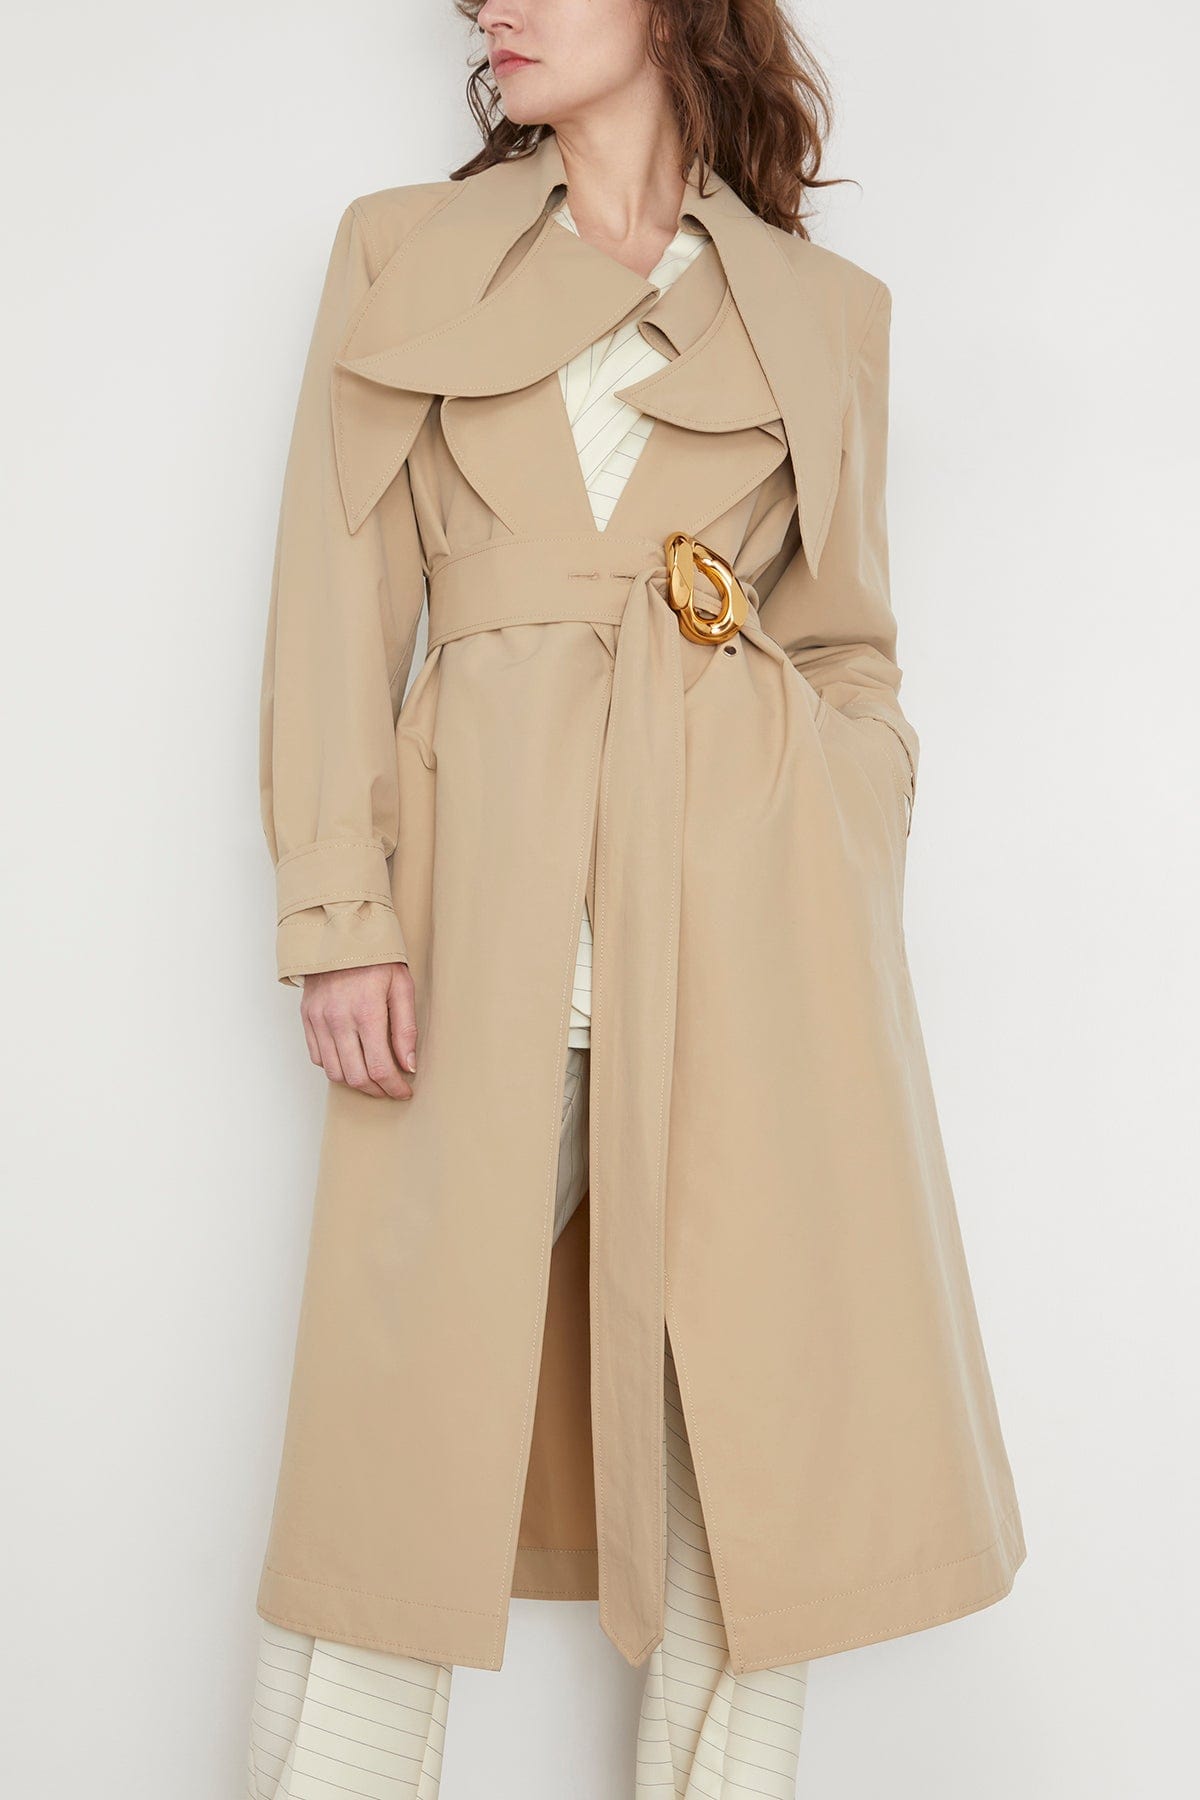 JW Anderson Coats Exaggerated Collar Chain Link Trench in Flax JW Anderson Exaggerated Collar Chain Link Trench in Flax